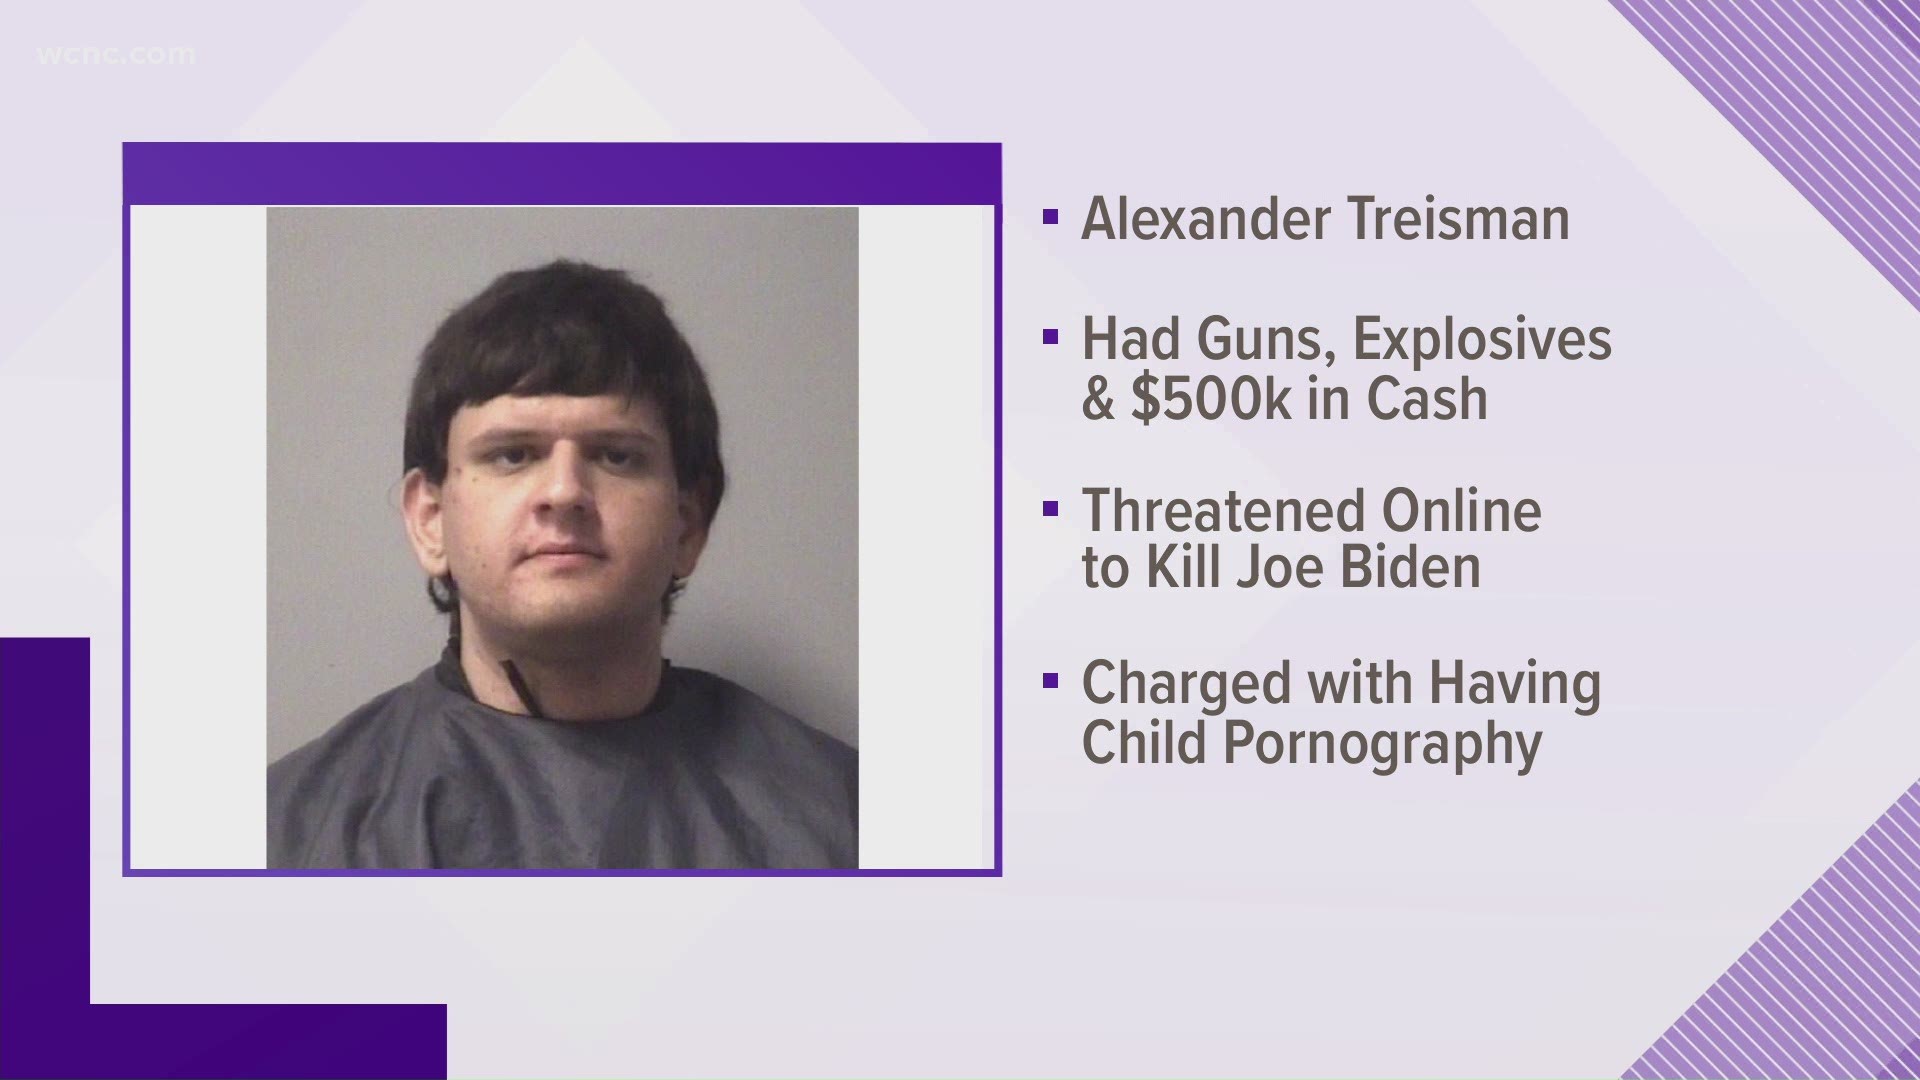 Alexander Treisman was arrested in Kannapolis with guns, explosives and $500k in cash.